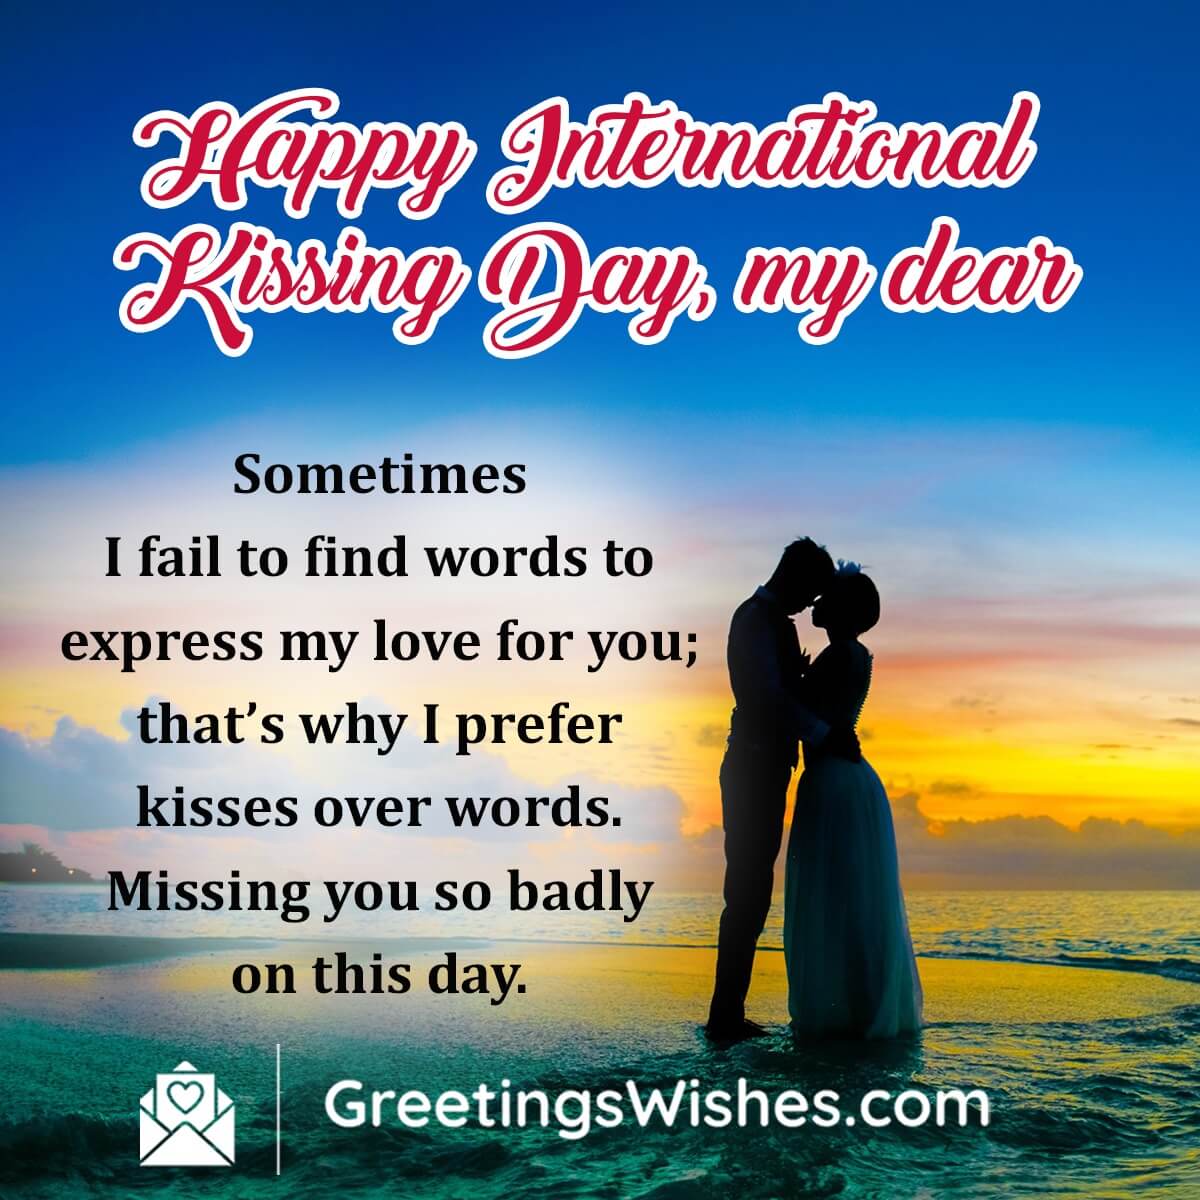 Happy International Kissing Day Messages